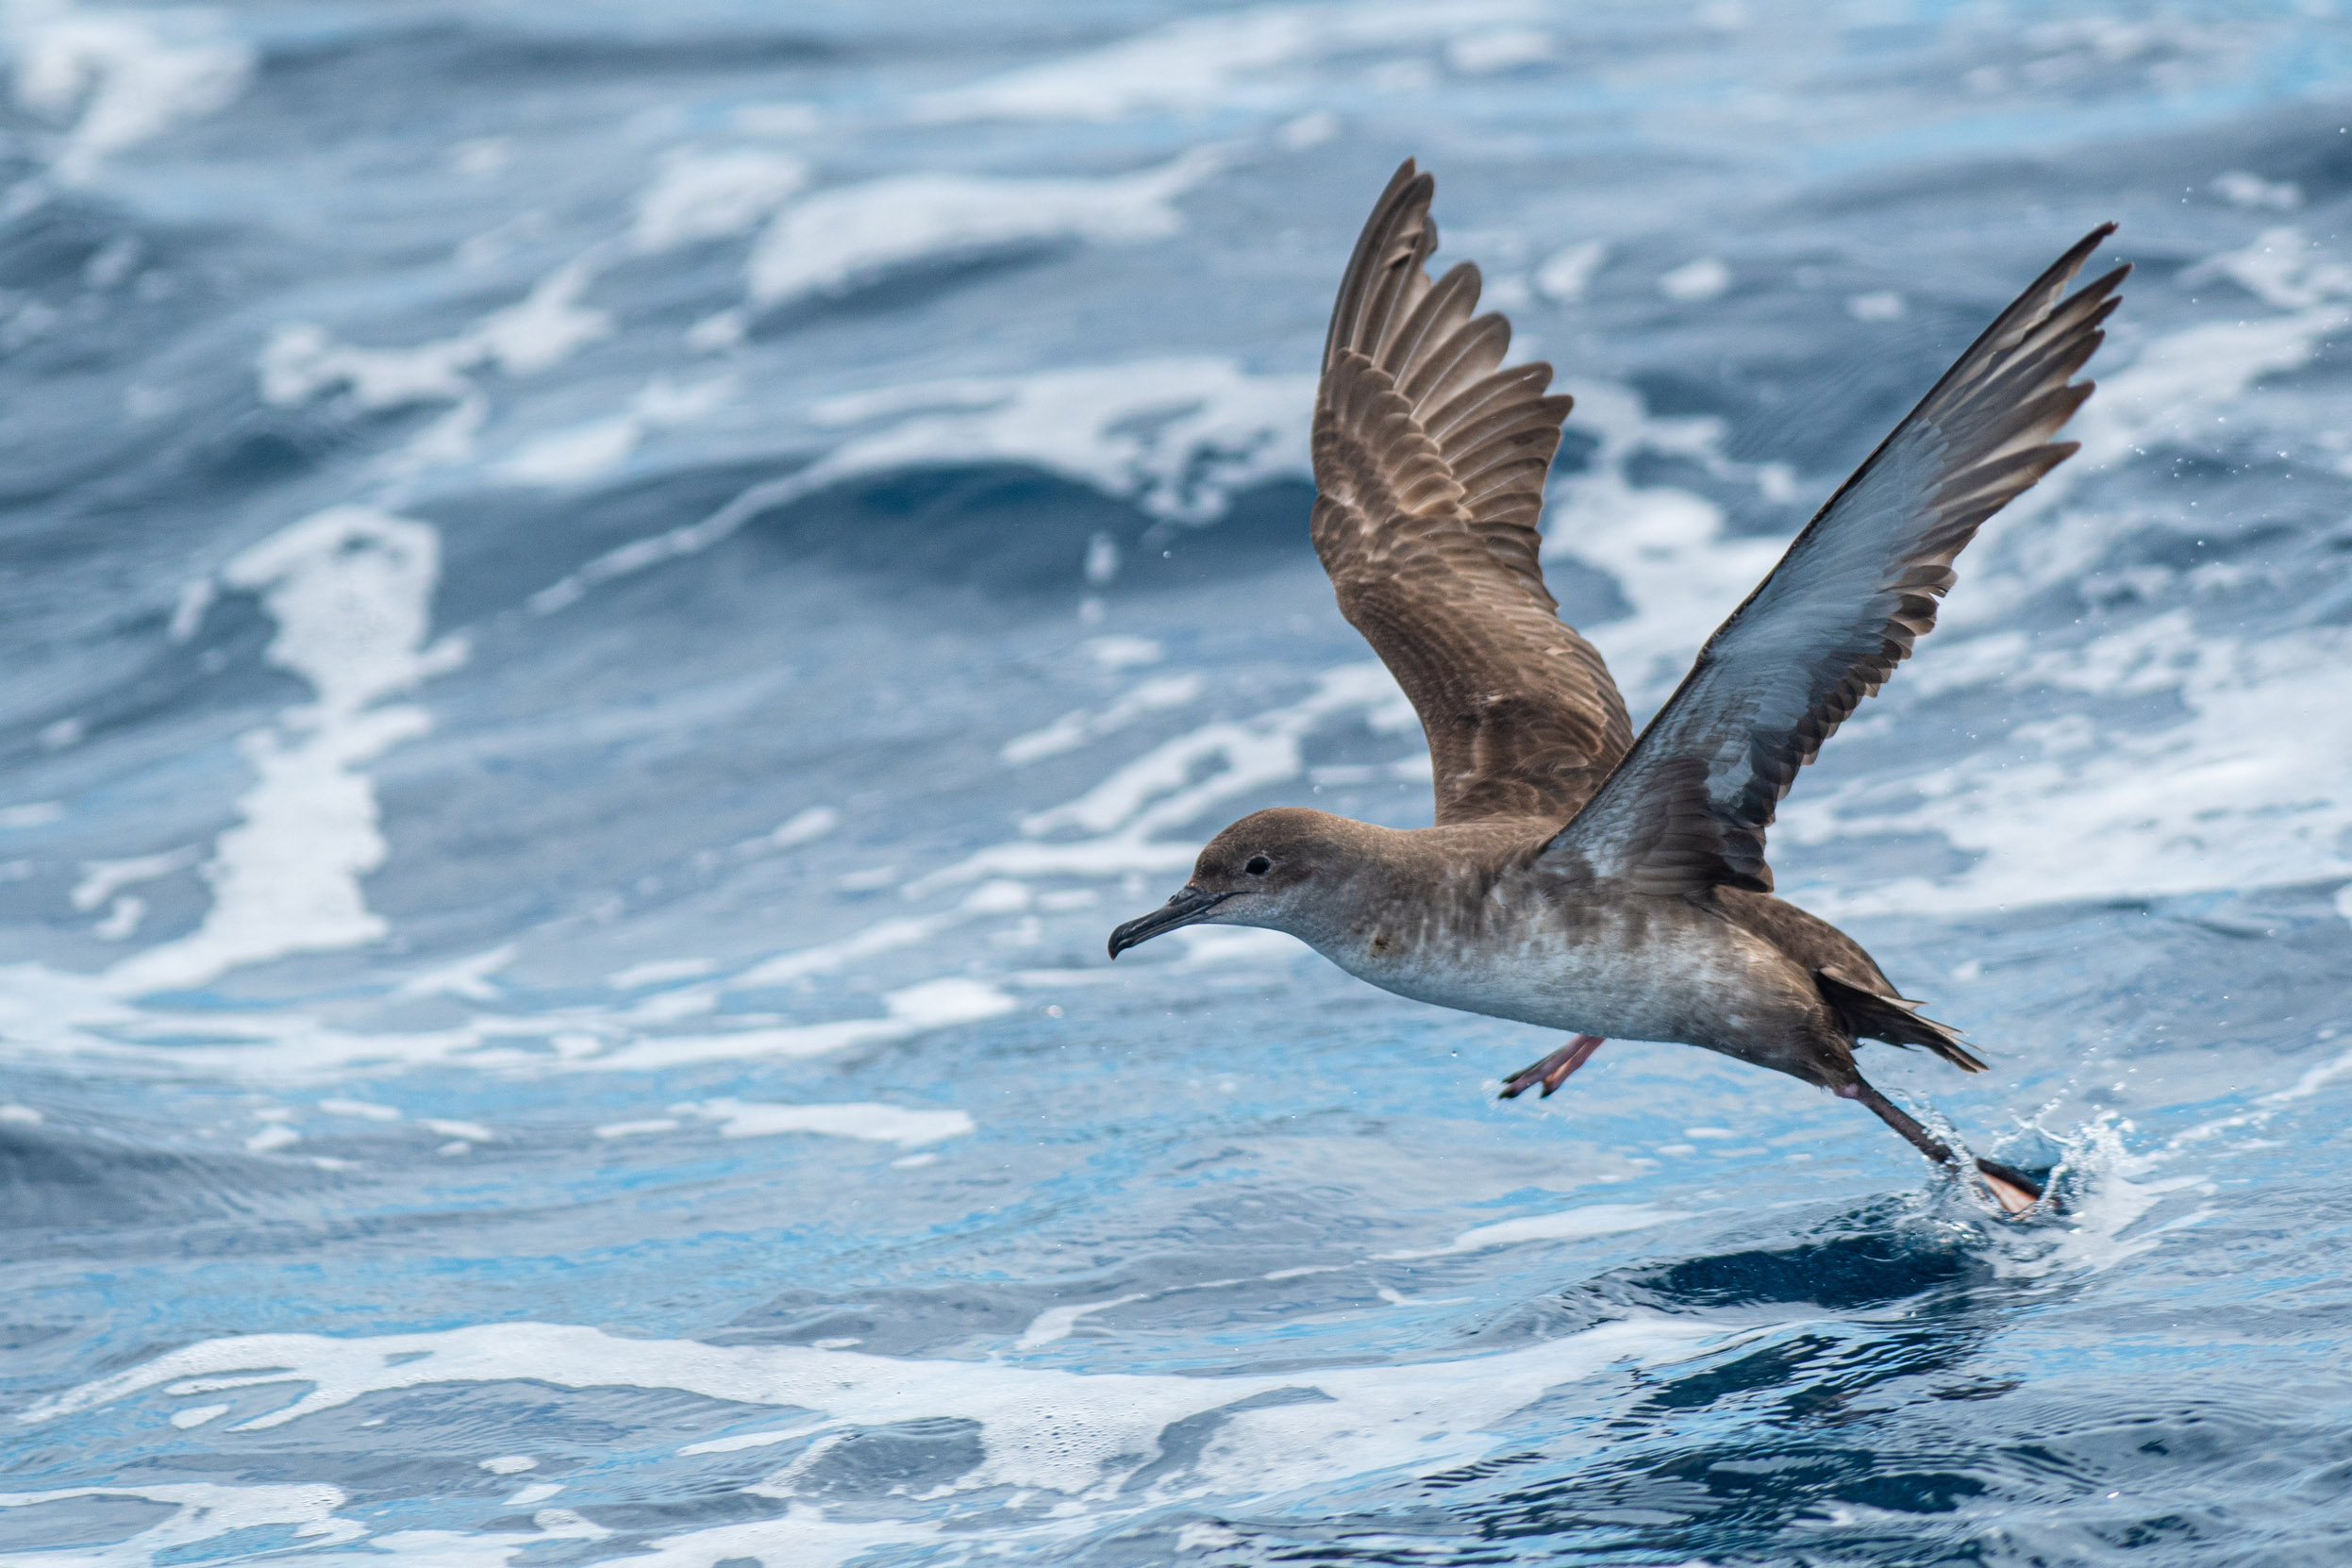 The Balearic Shearwater is flying over a blue sea with their feet touching the crashing waves.